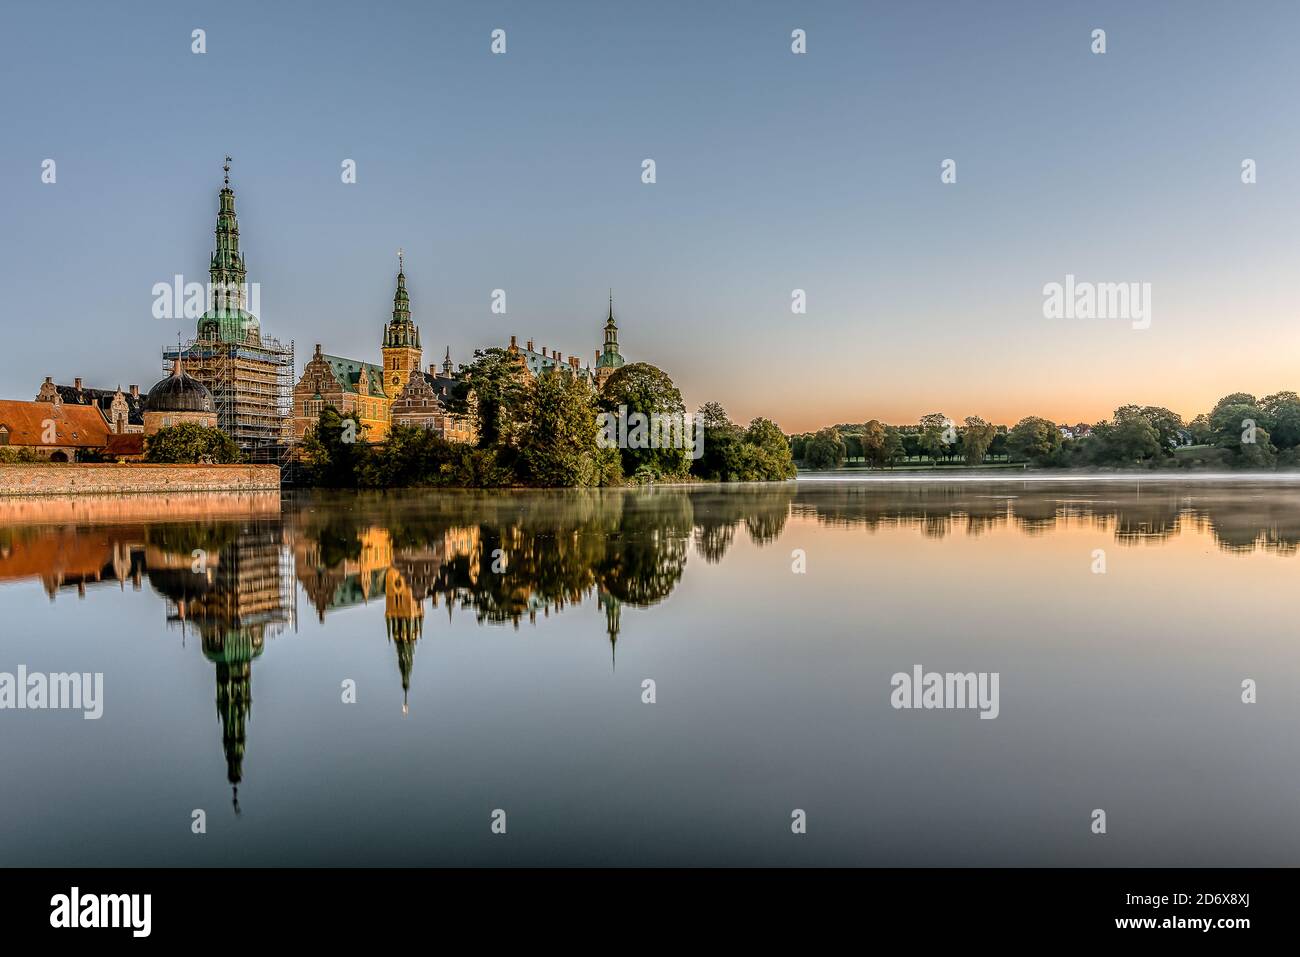 the mirror-shiny lake of Frederiksborg with reflections of the enlightened castle at sunrise, Hillerod, Denmark, October 17, 2020 Stock Photo